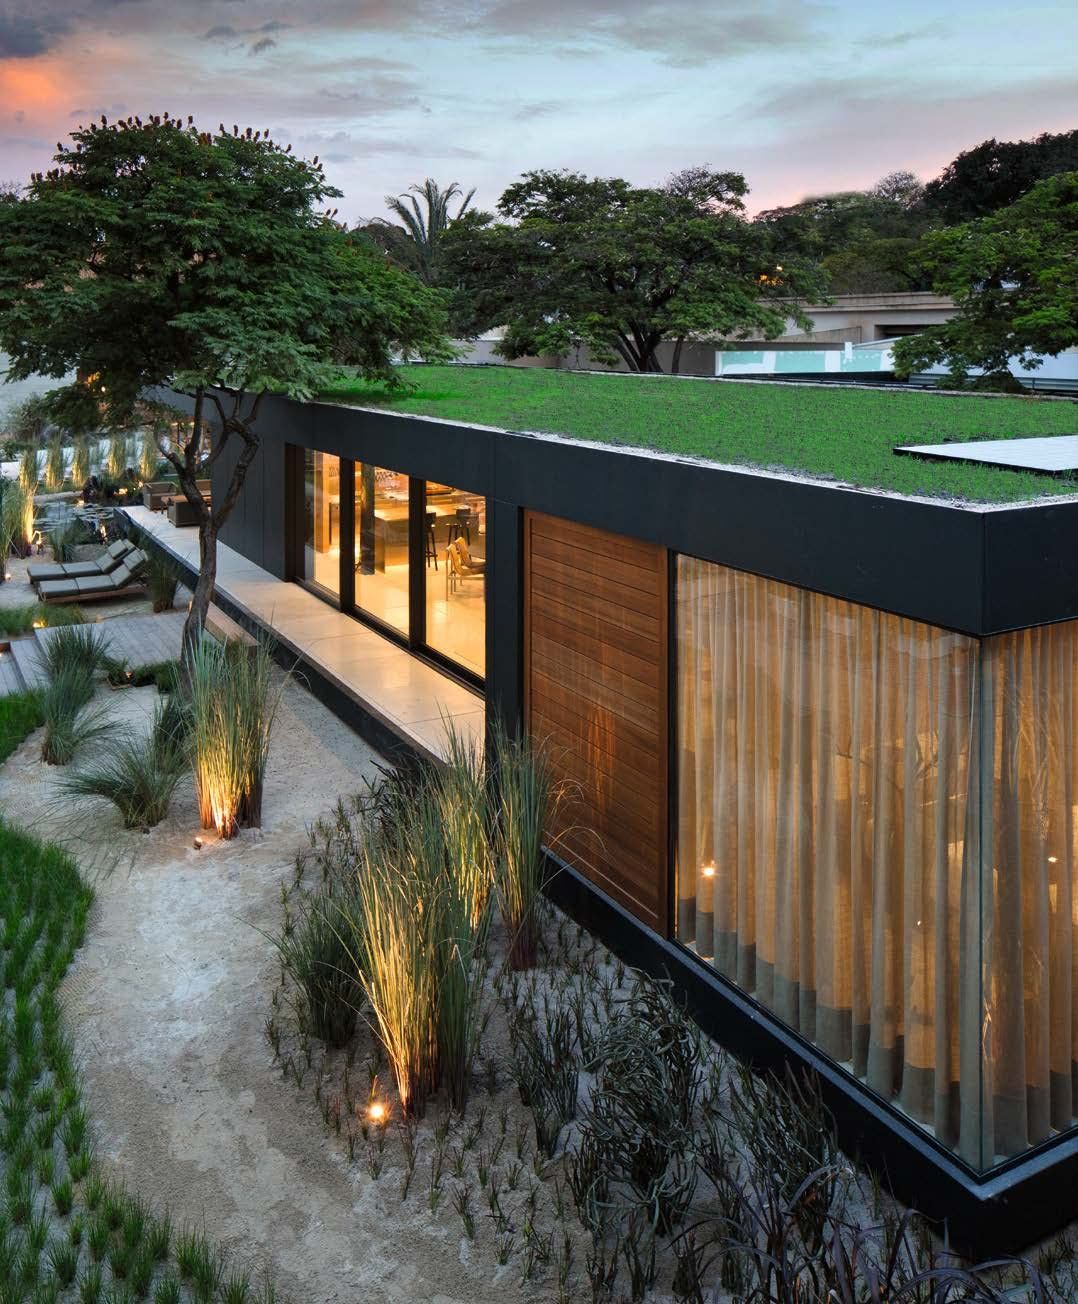  Future Homes - Sustainable Innovative Designs 